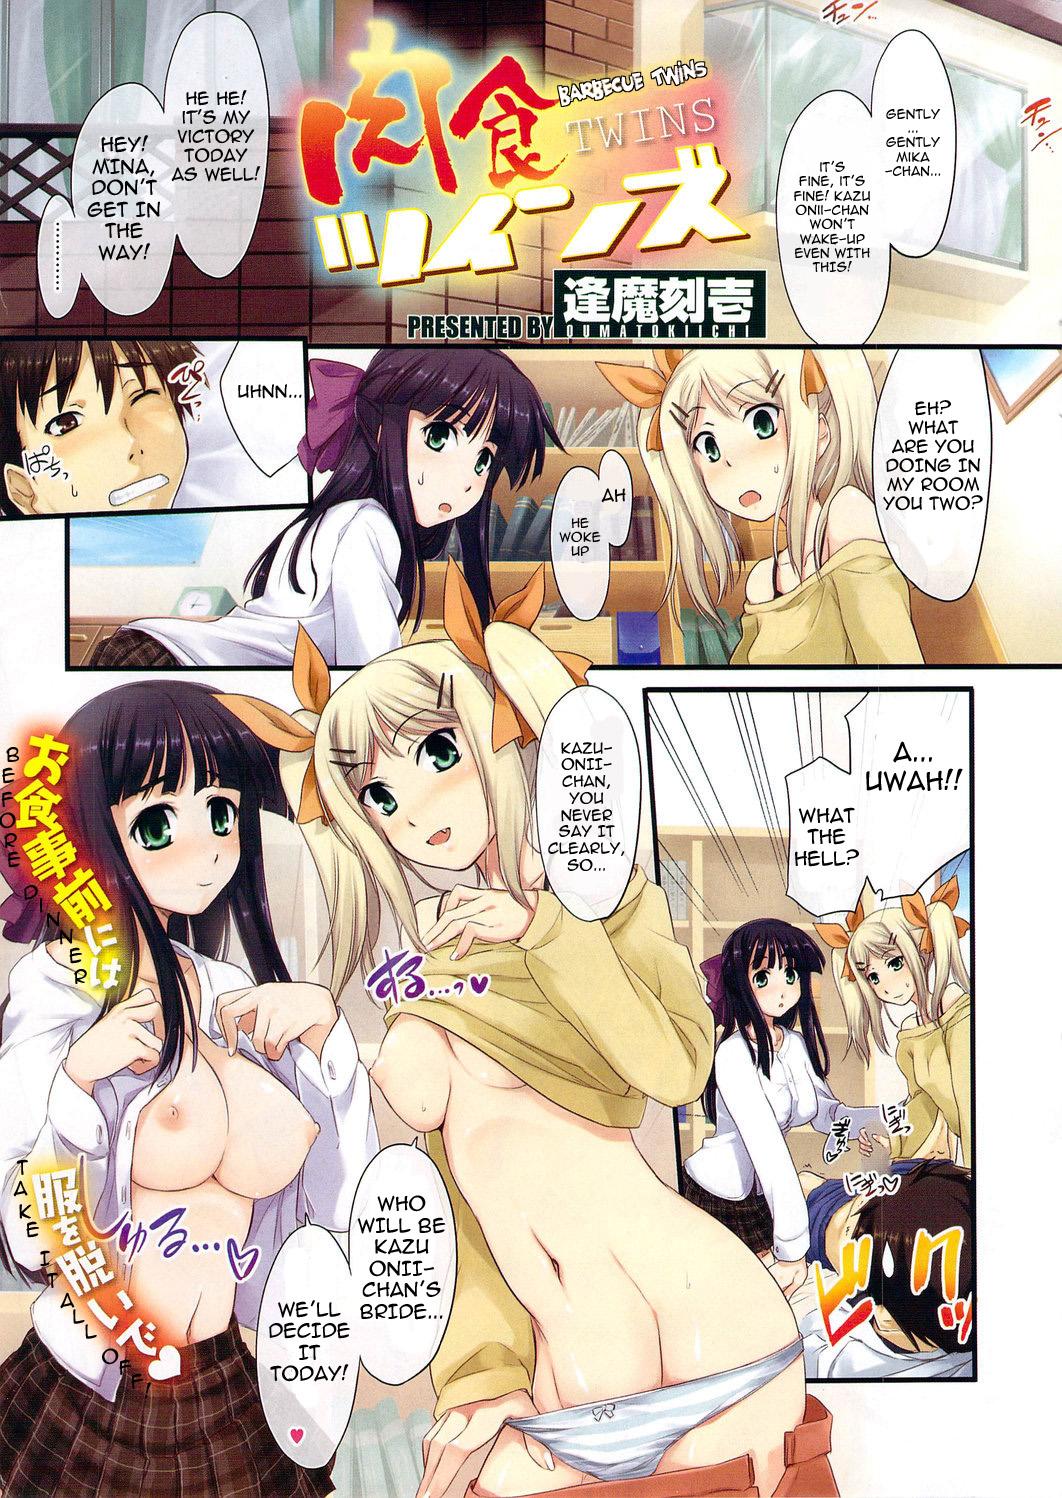 Self [Anthology] Short Full-Color H-Manga Chapters [Eng] {doujin-moe.us} Culonas - Page 7